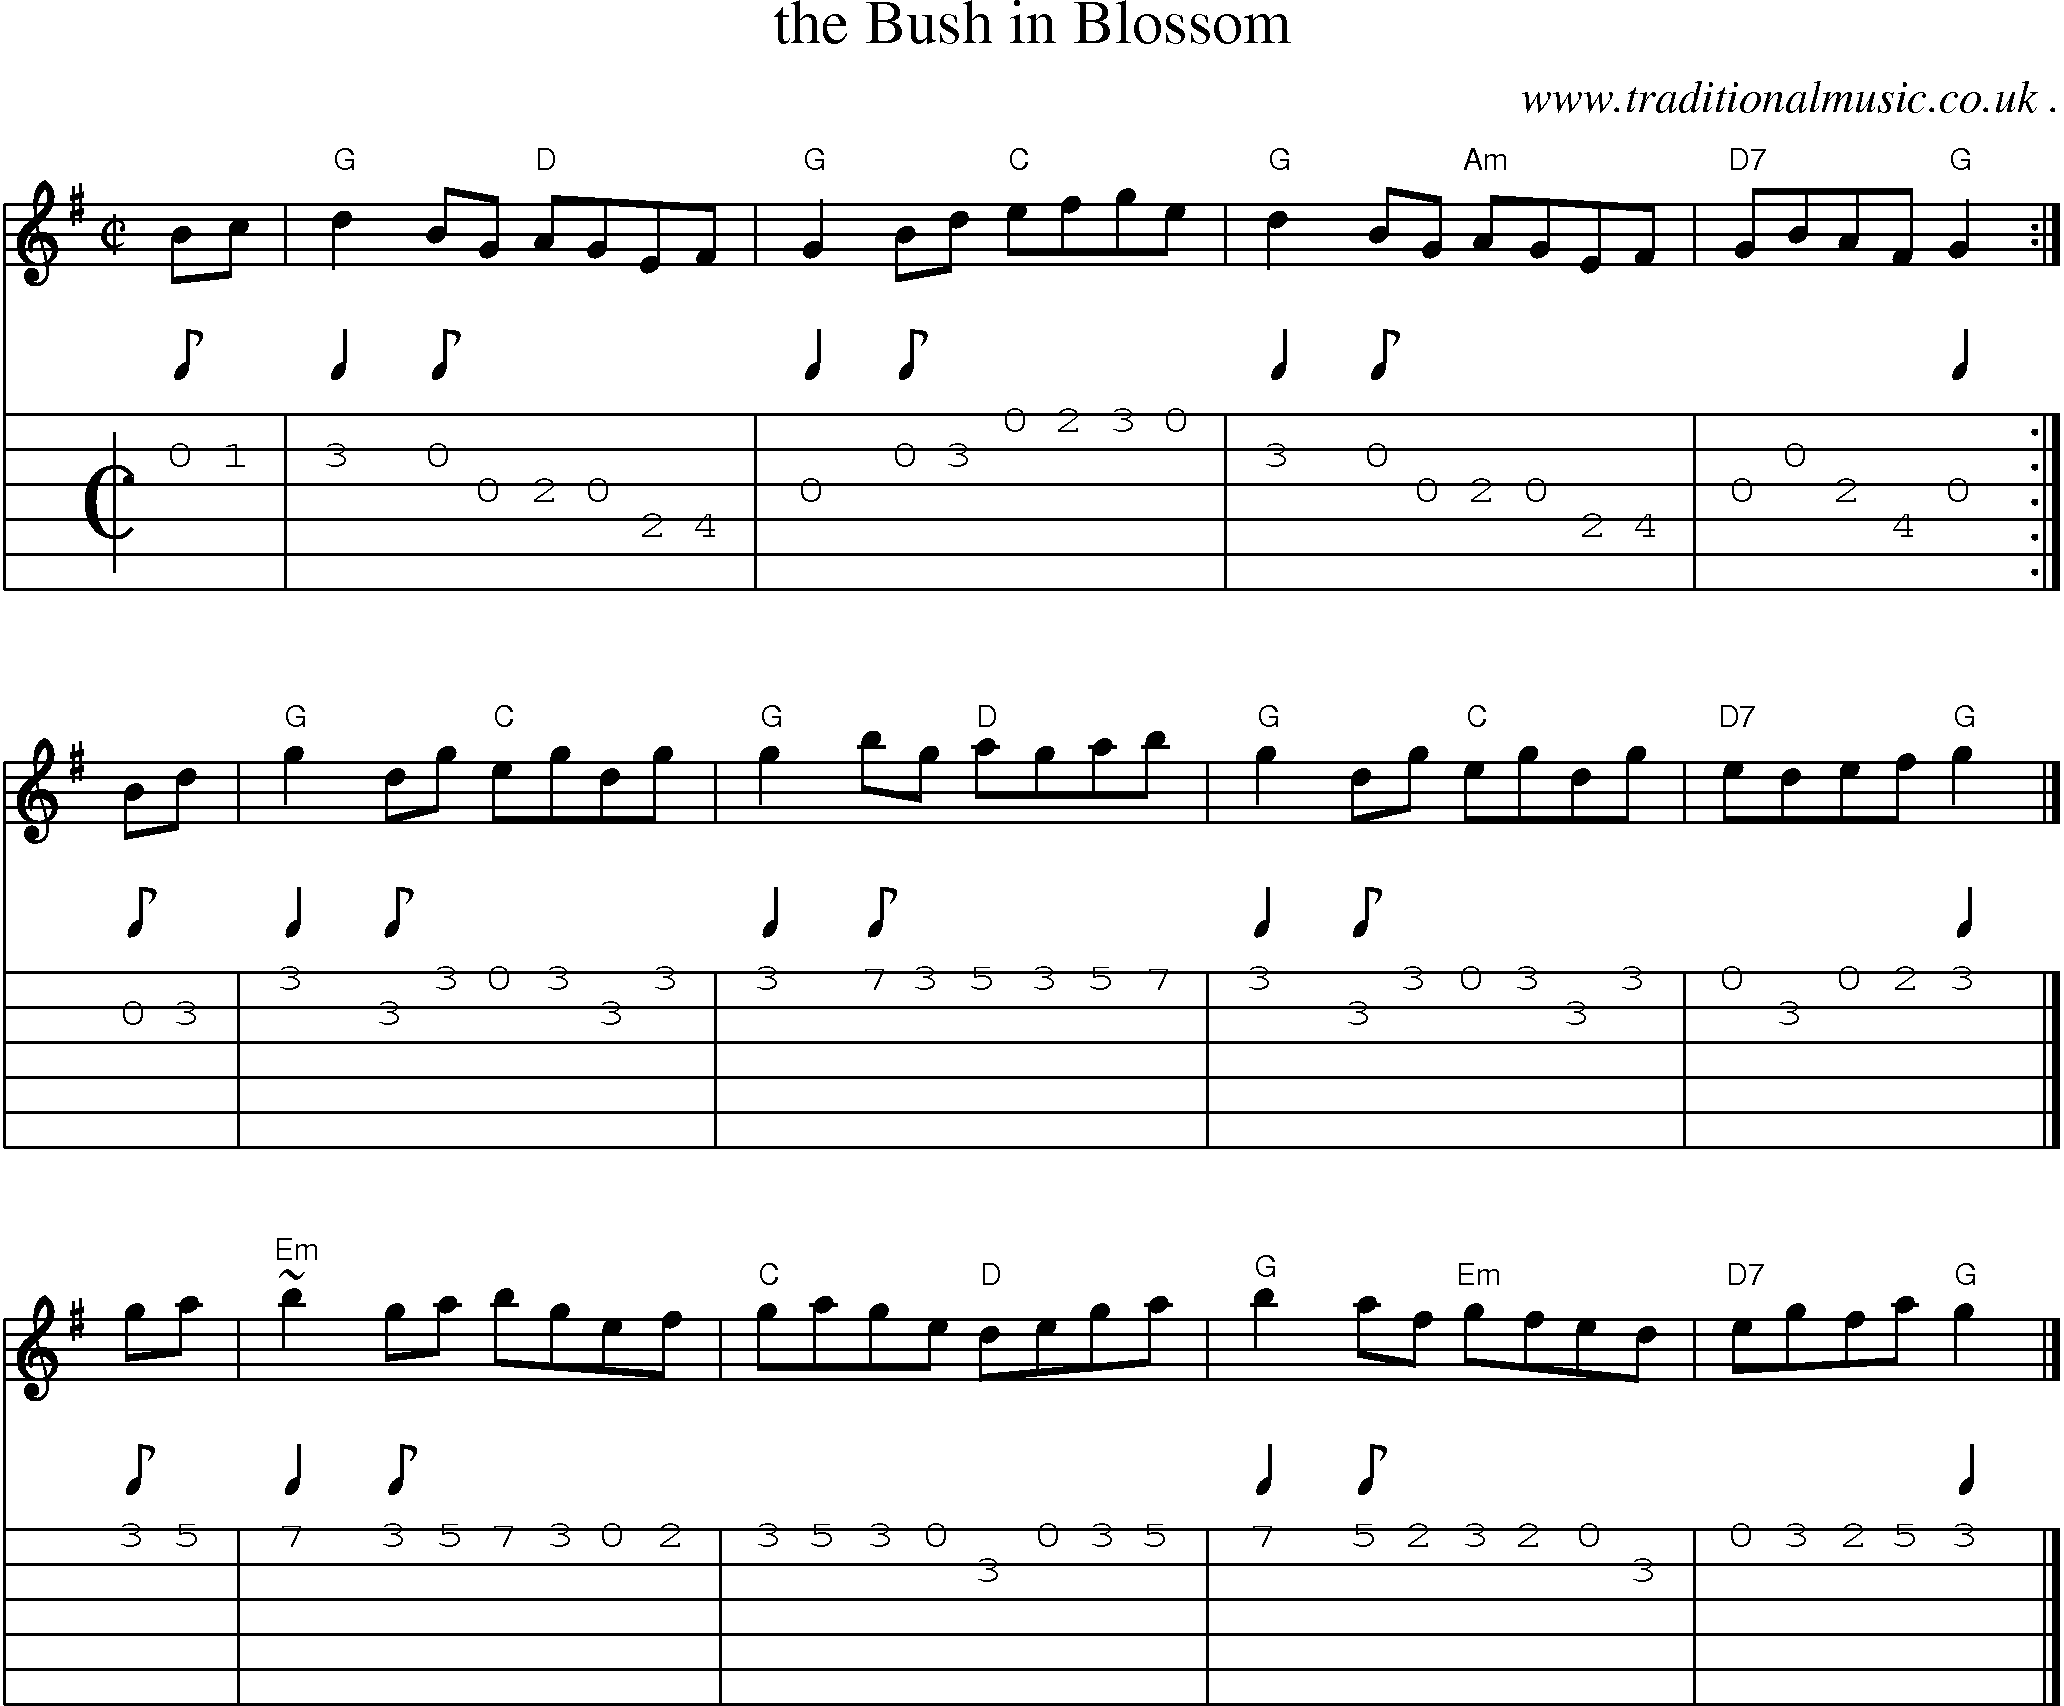 Sheet-music  score, Chords and Guitar Tabs for The Bush In Blossom